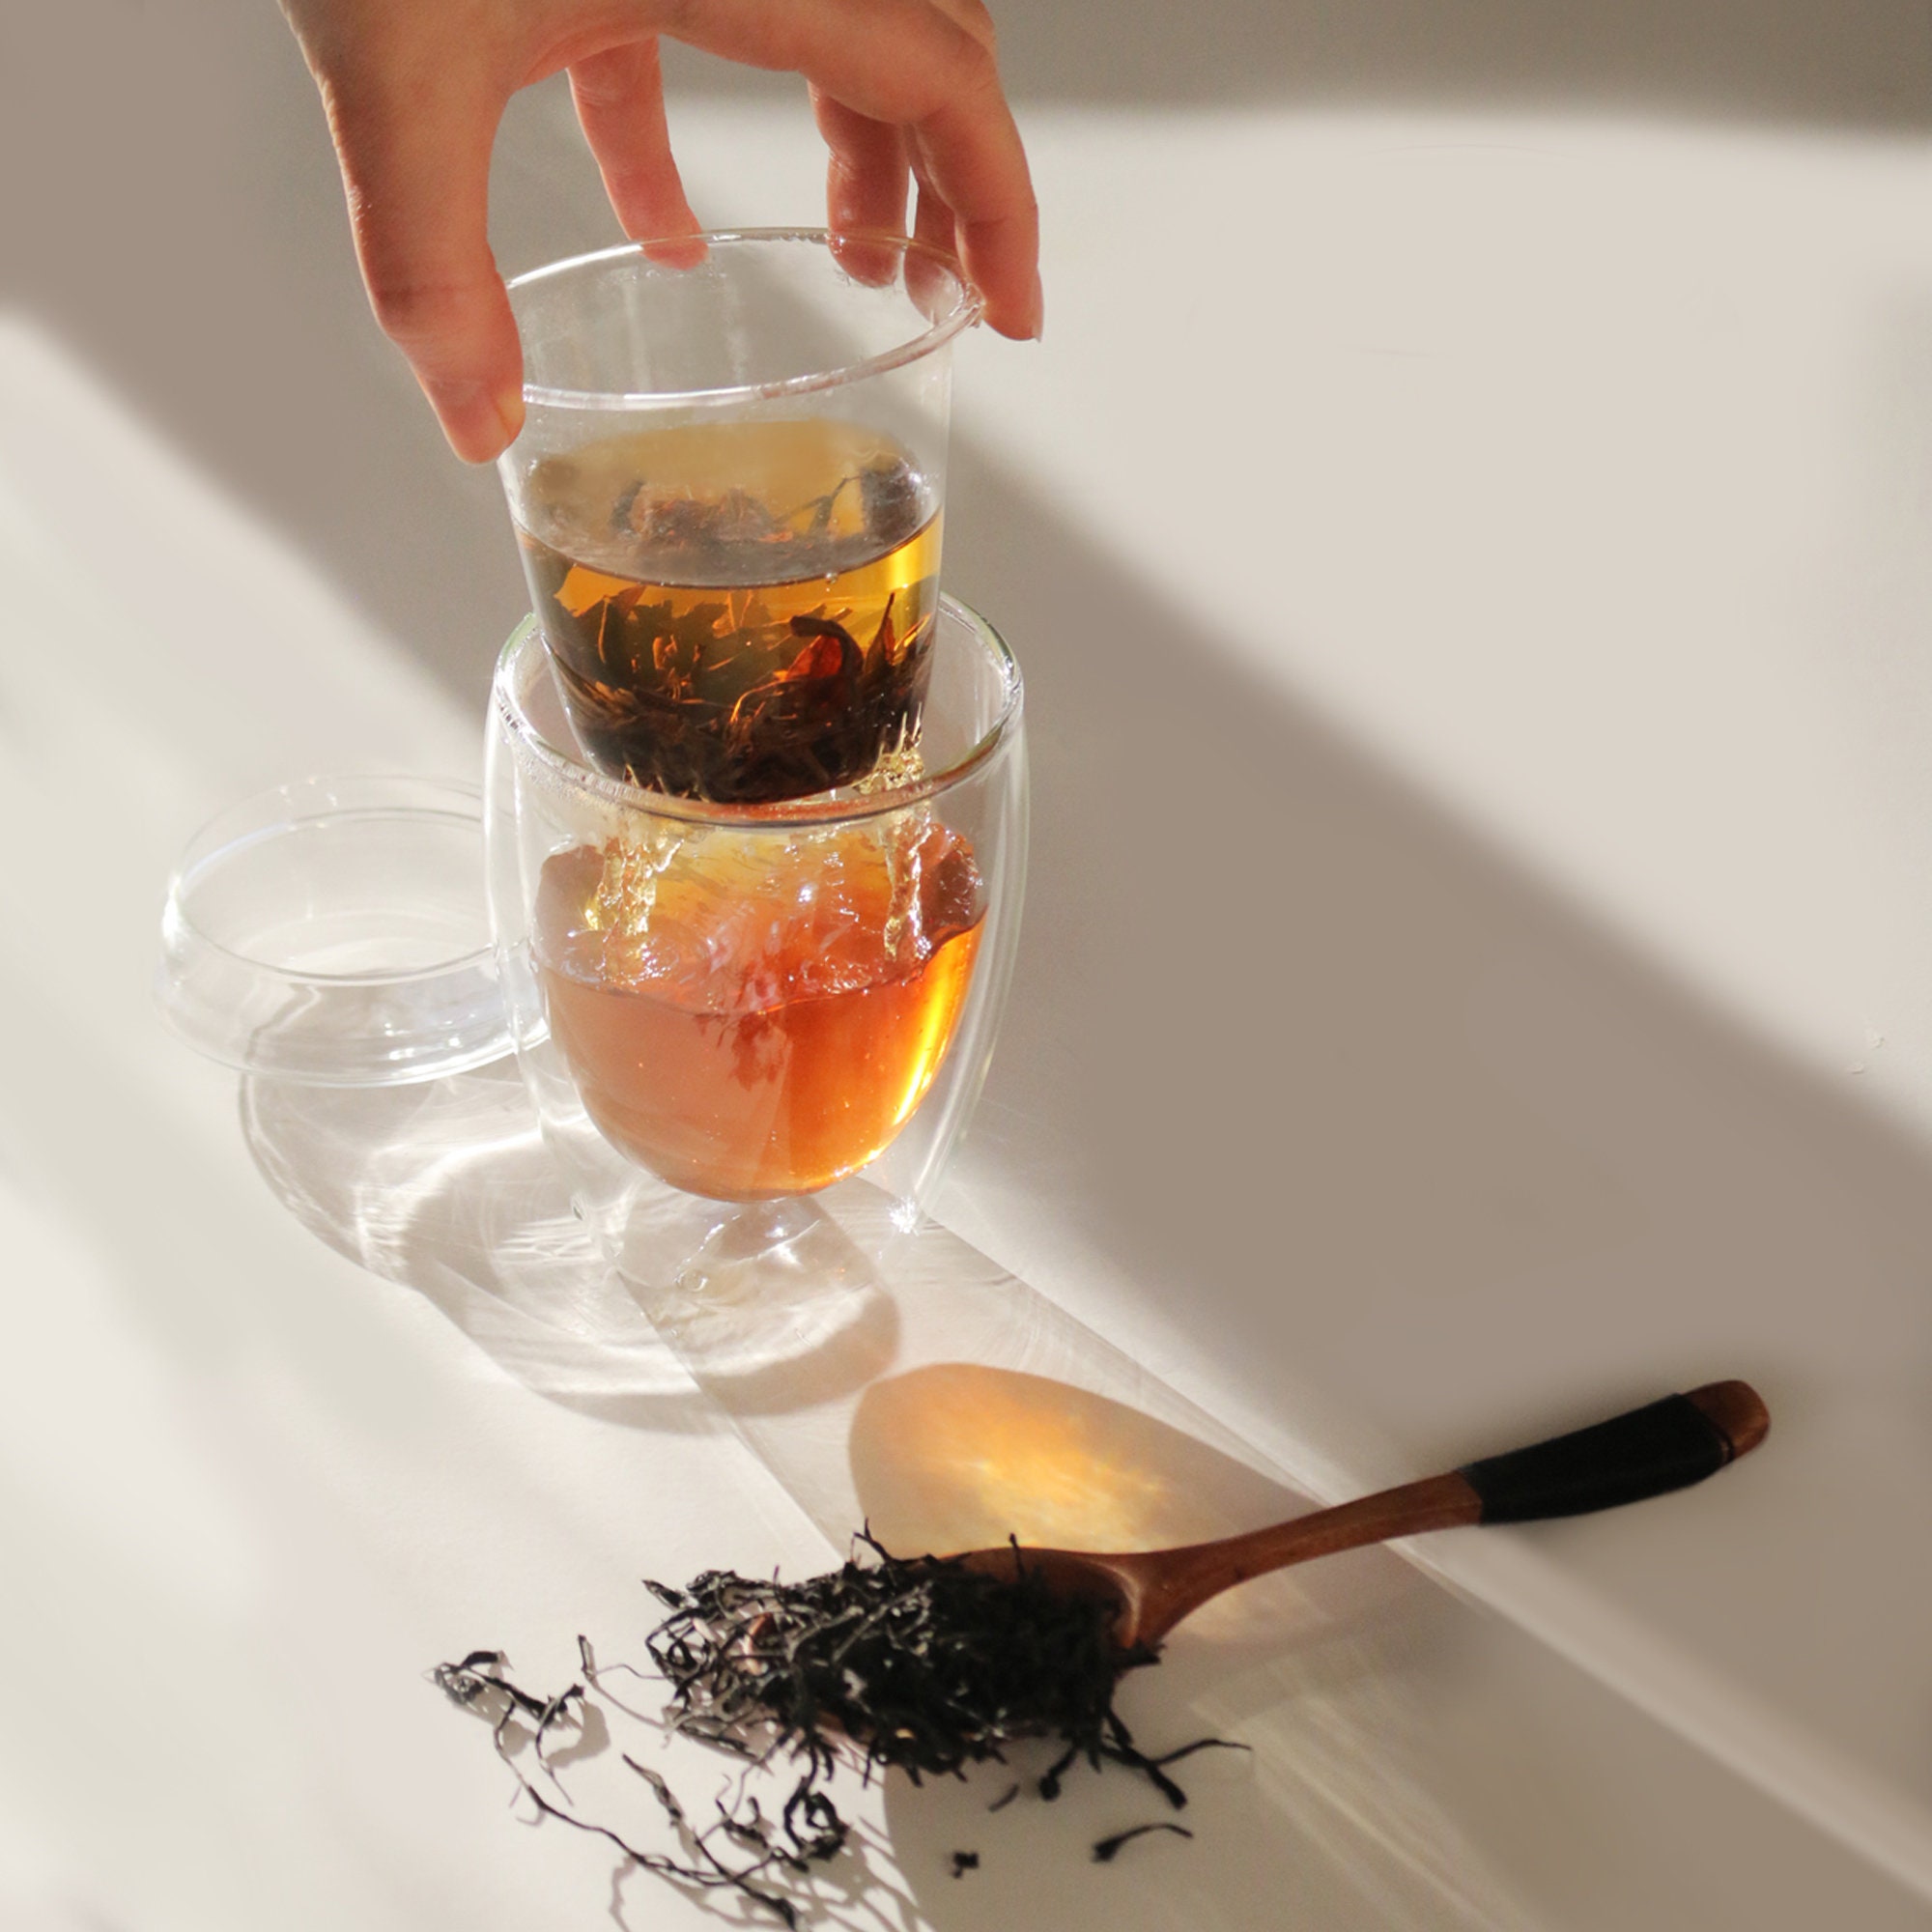 Sips by Glass Teapot | Removable Glass Tea Infuser | Star Accented Porcelain Lid | 20 oz Capacity | Loose Leaf Tea Gift Sets